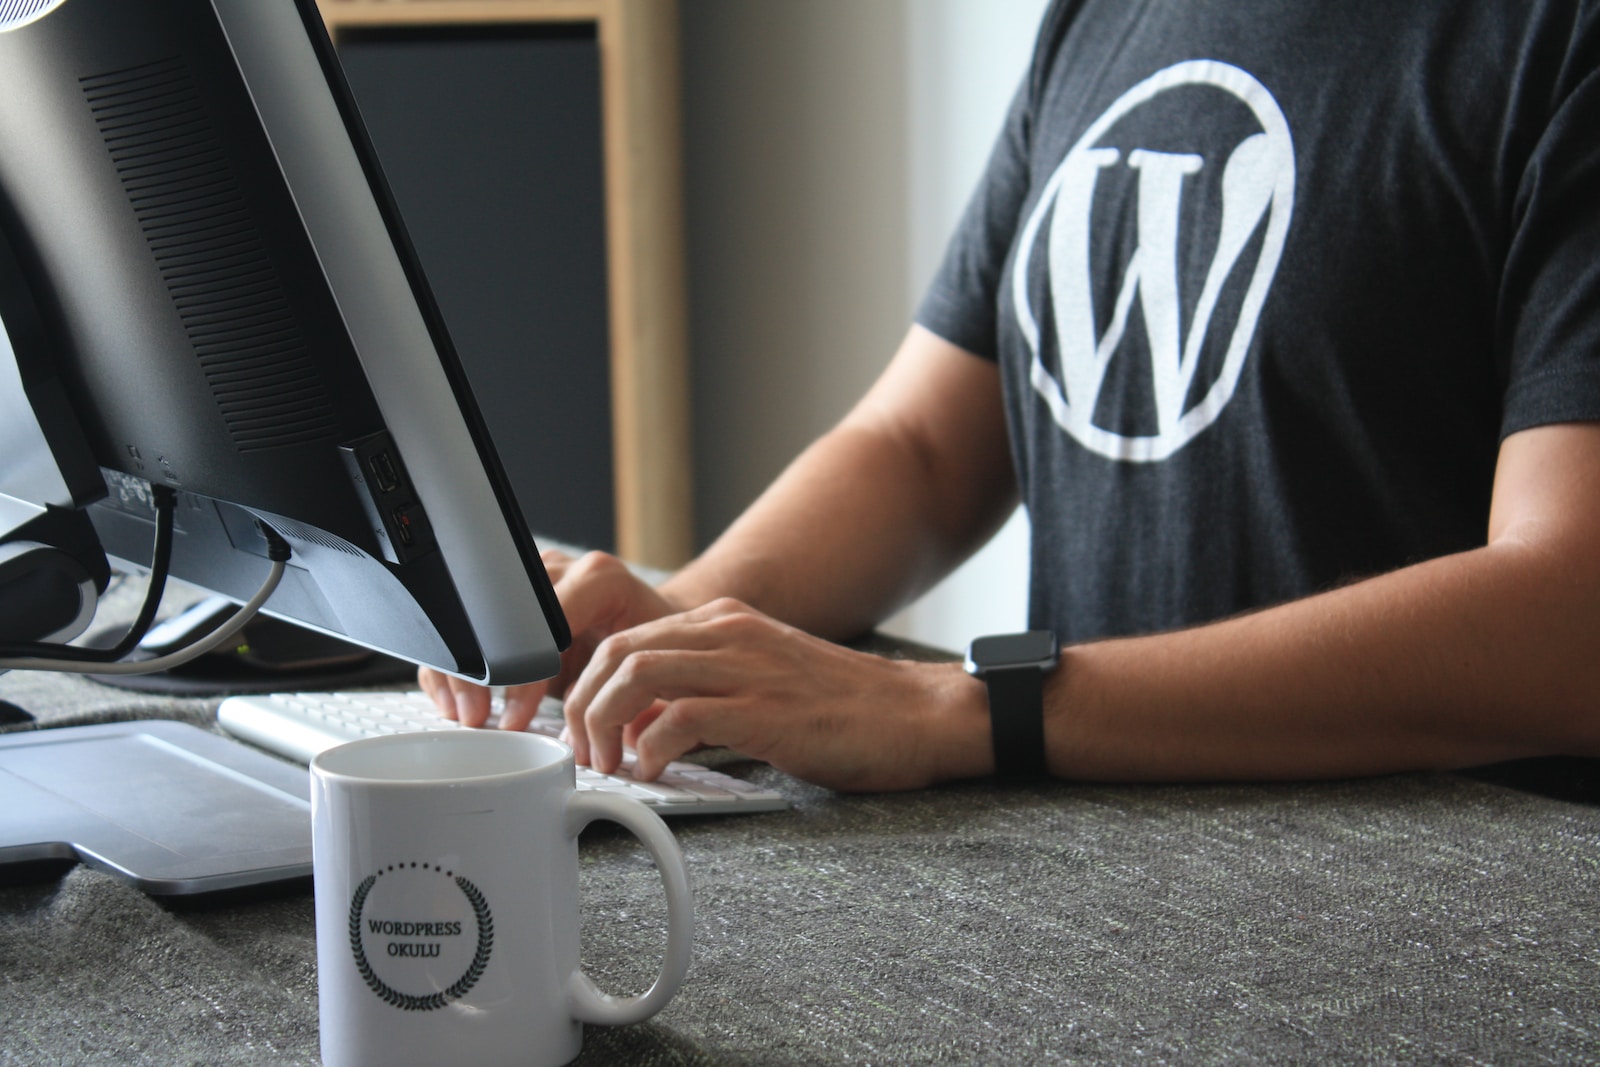 Why You Should Get a Website for Your Business (and How a WordPress Website Can Help You Get Online in Hours)?